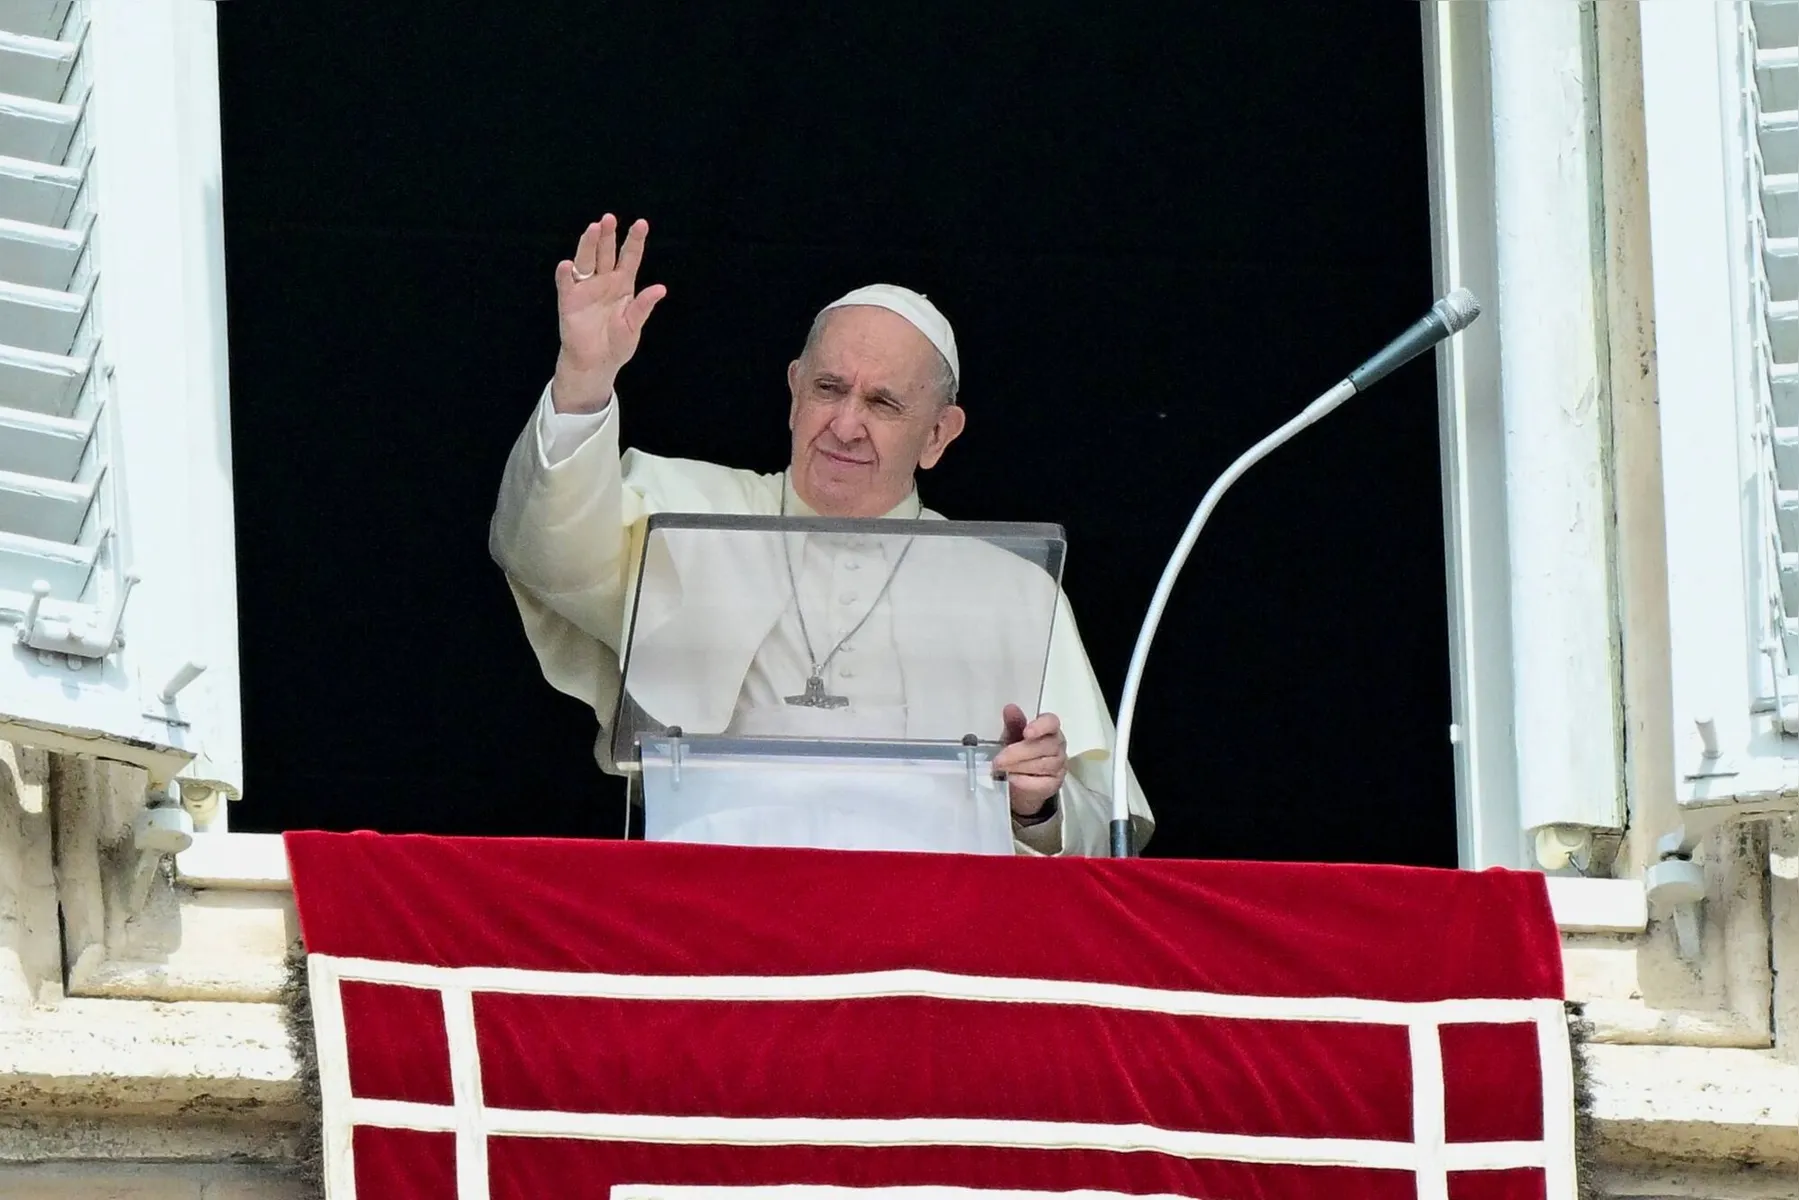 Pope Francis waves before speaking to the crowd during his Angelus prayer from the window of the apostolic palace overlooking St Peter's Square at the Vatican, on March 27, 2022. (Photo by VINCENZO PINTO / AFP)